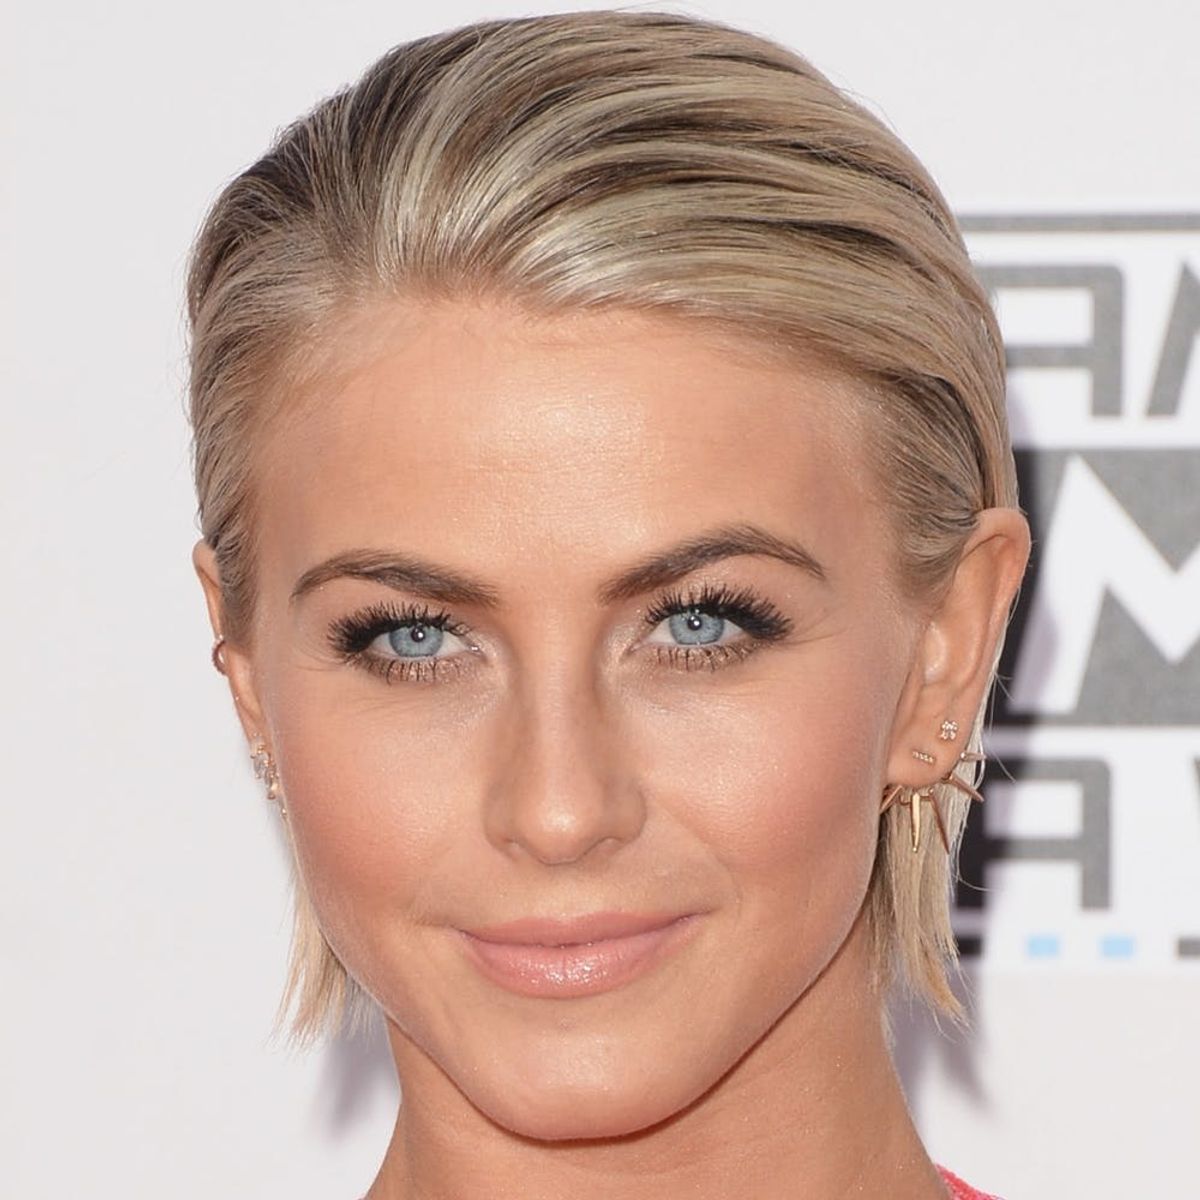 You Won’t Believe How Long It Took to Do Julianne Hough’s Post-Wedding Hair